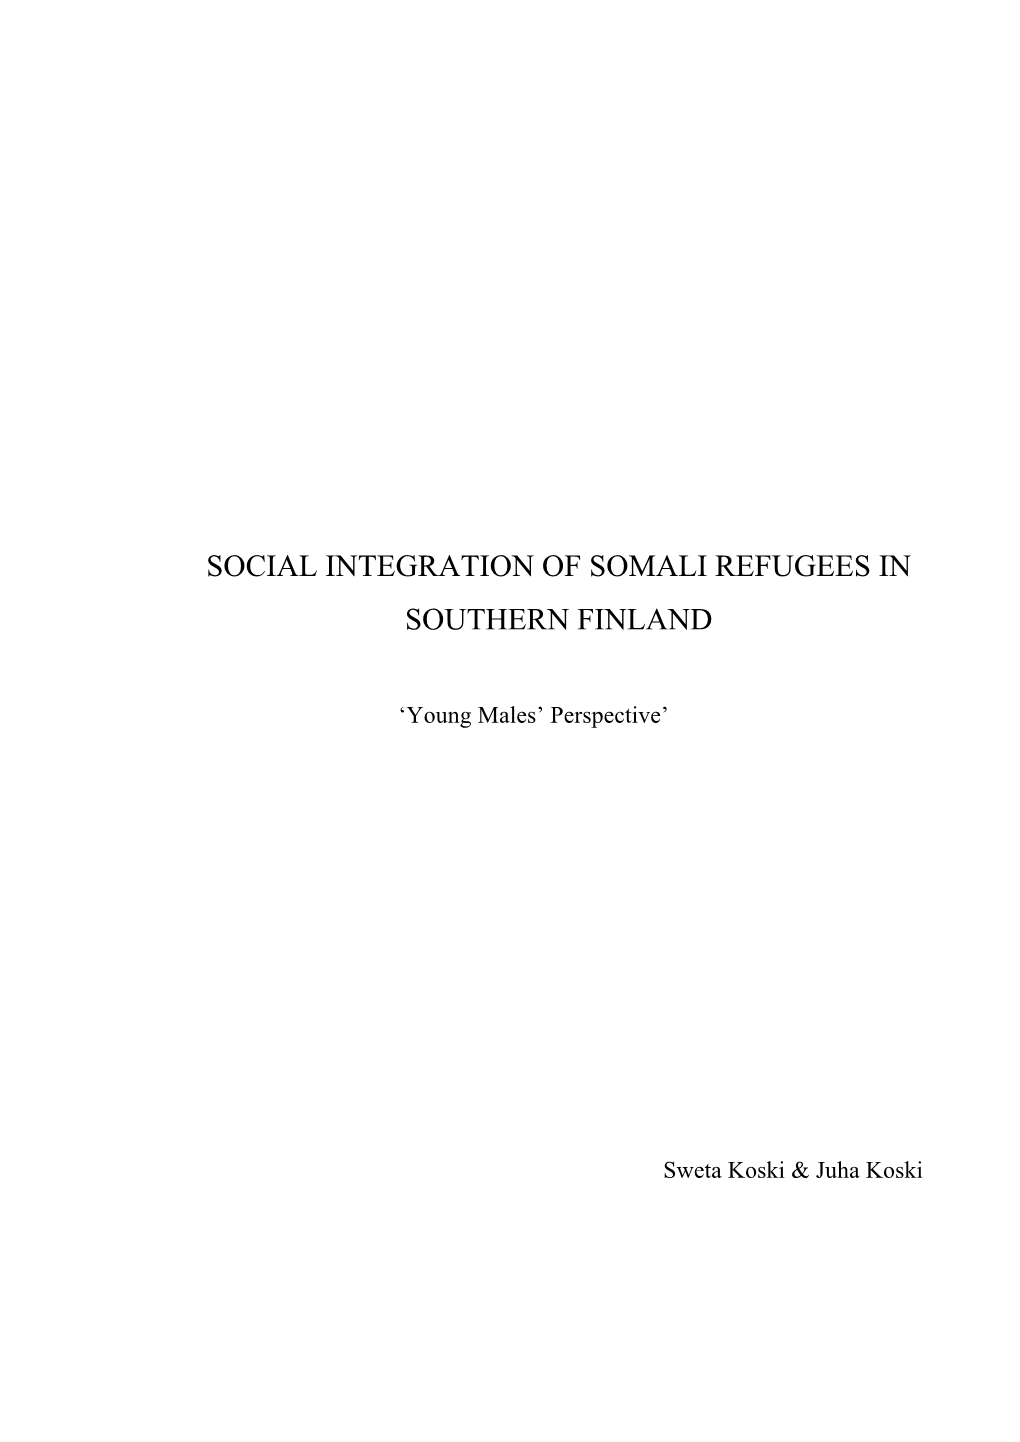 Social Integration of Somali Refugees in Southern Finland